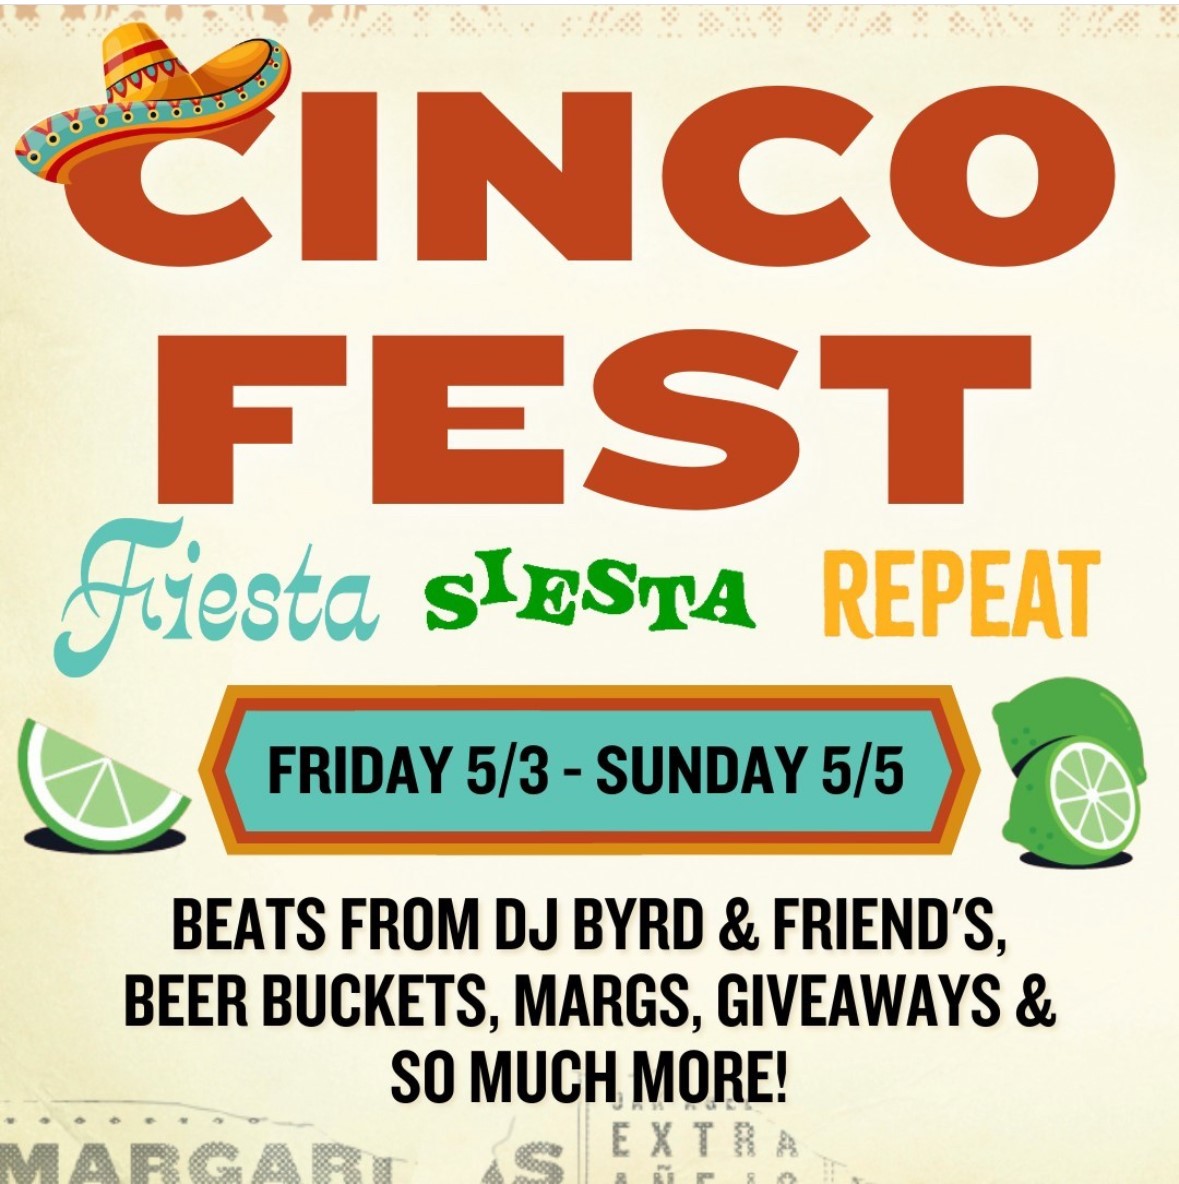 Taco ’bout a party! Cinco Fest Weekend at !  Kicking off on Friday, 5/3!  Enjoy beats from  , beer buckets, margs, giveaways and more! Face painting on Sunday from 1-4 pm.  #CincoDeMayo #HaddonTwp #ShopHaddon #NJEvents #CincoDeMayoEvents